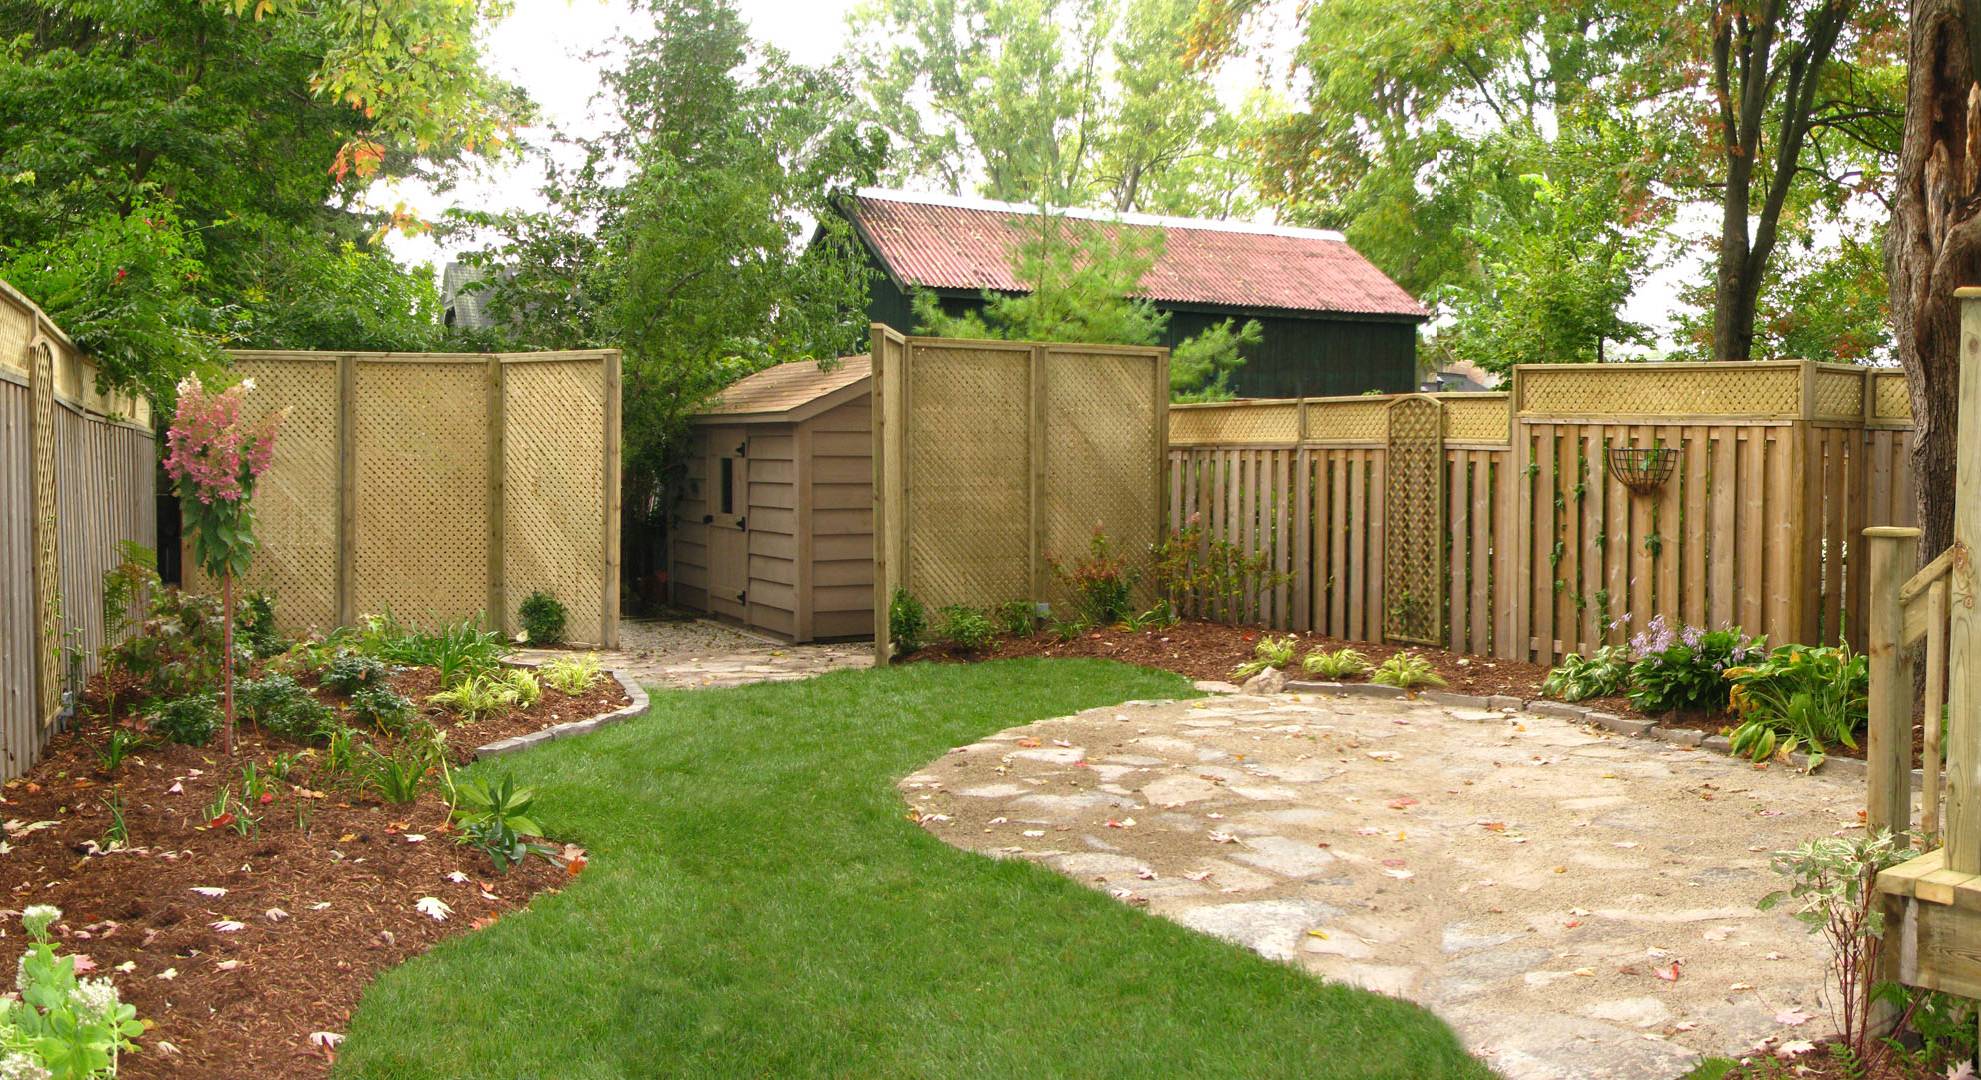 A landscaping, hardscaping and woodwork project in London Ontario. Complete backyard overhaul.